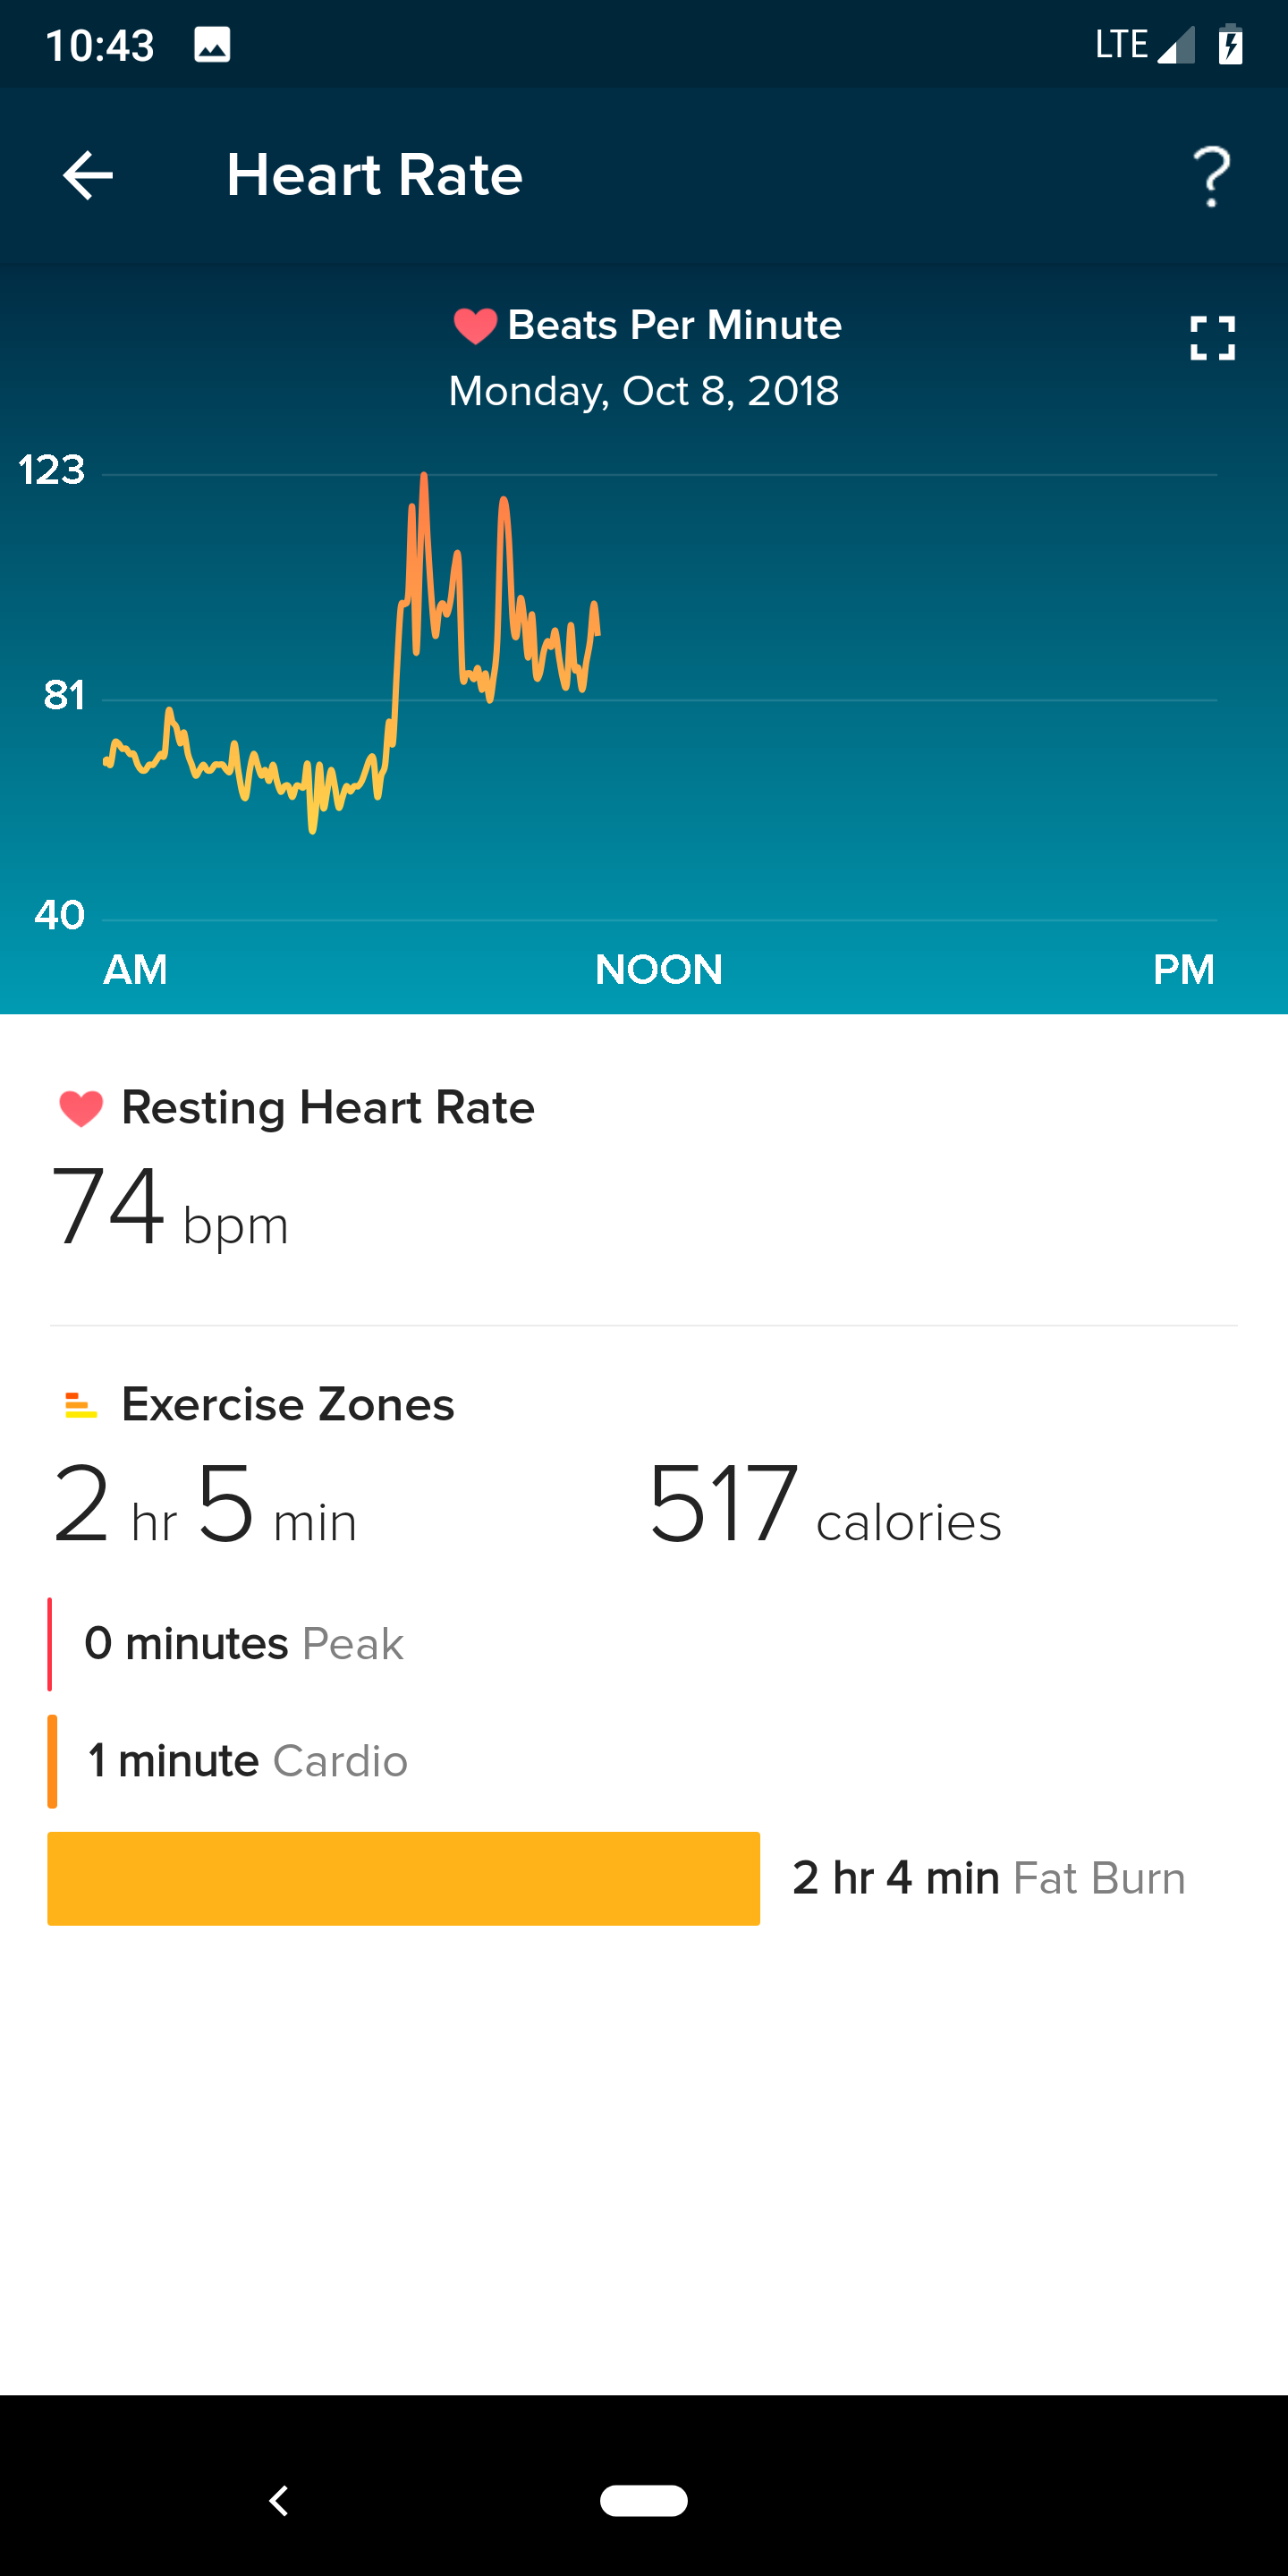 fitbit no heart rate